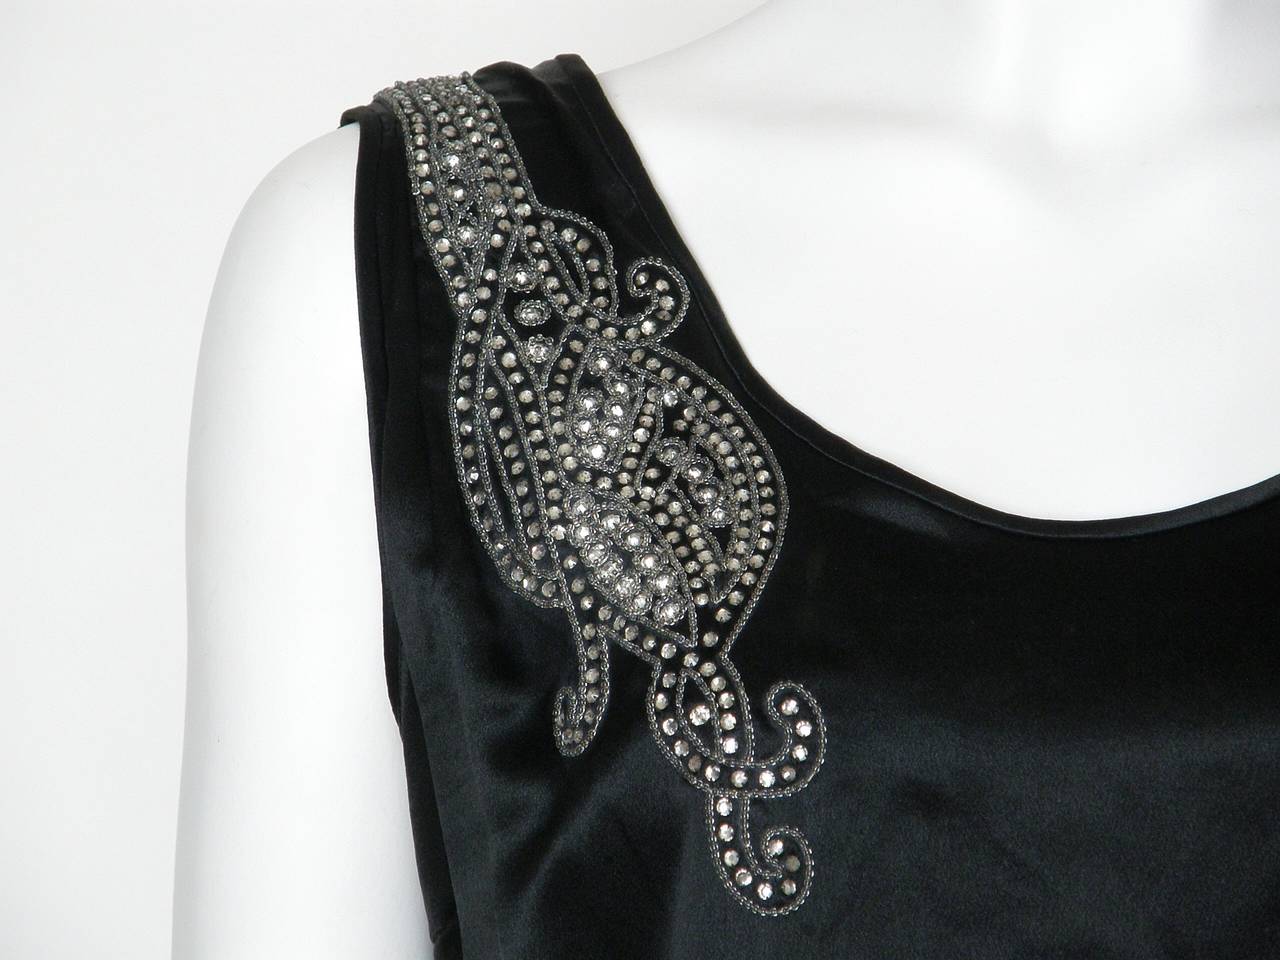 Women's Black Satin Art Deco Style Evening Blouse with Rhinestones and Beading For Sale